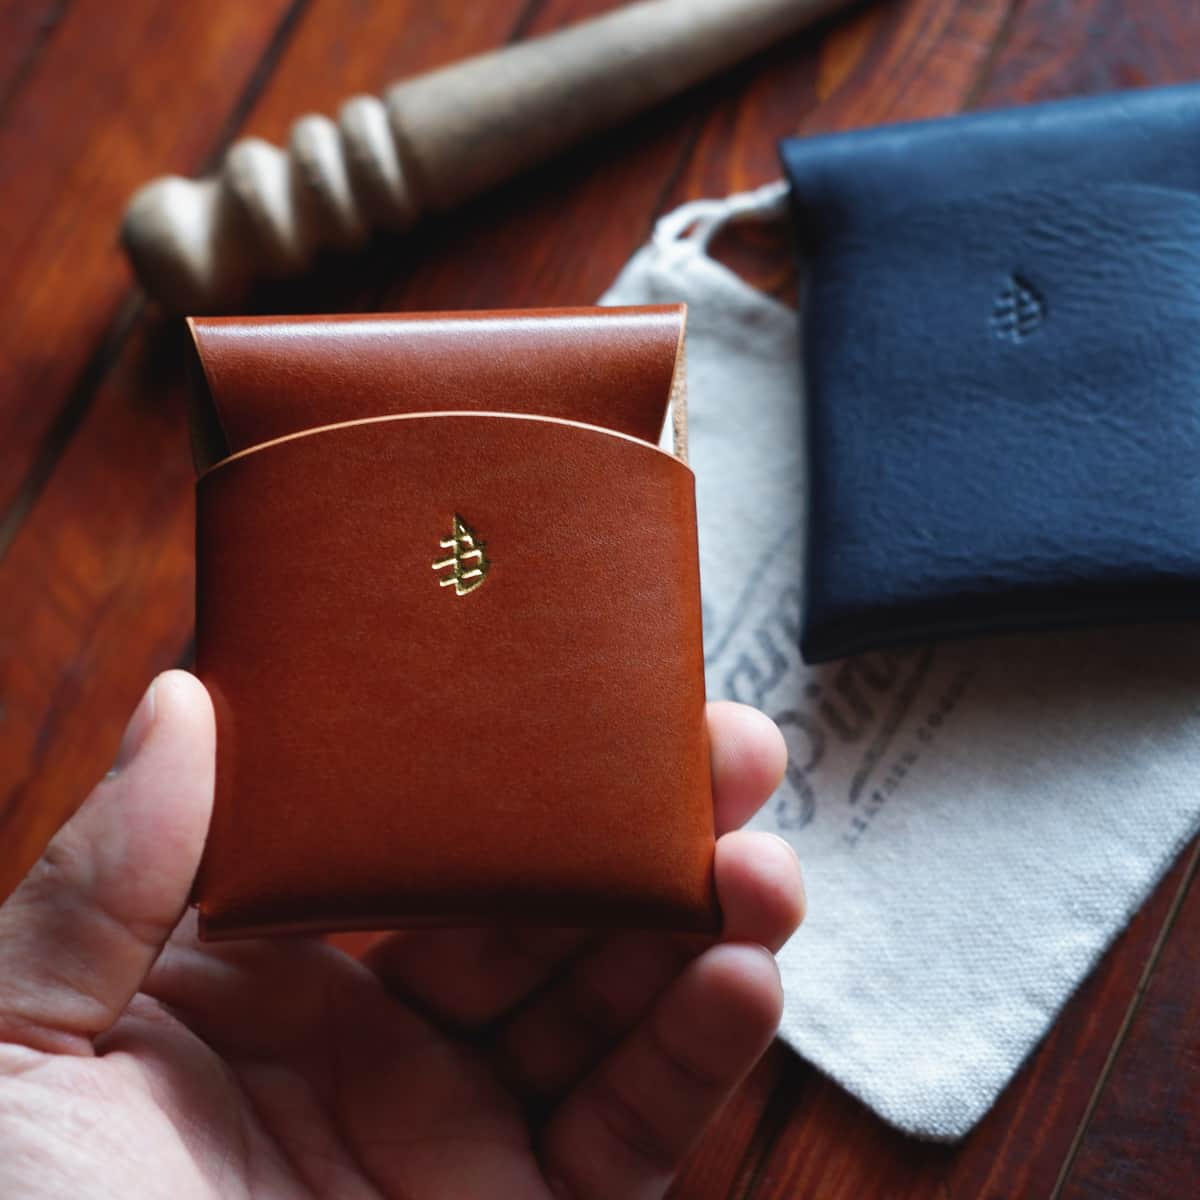 The Lodgepole Stitchless Wallet in Firenze Lux leather held in hand